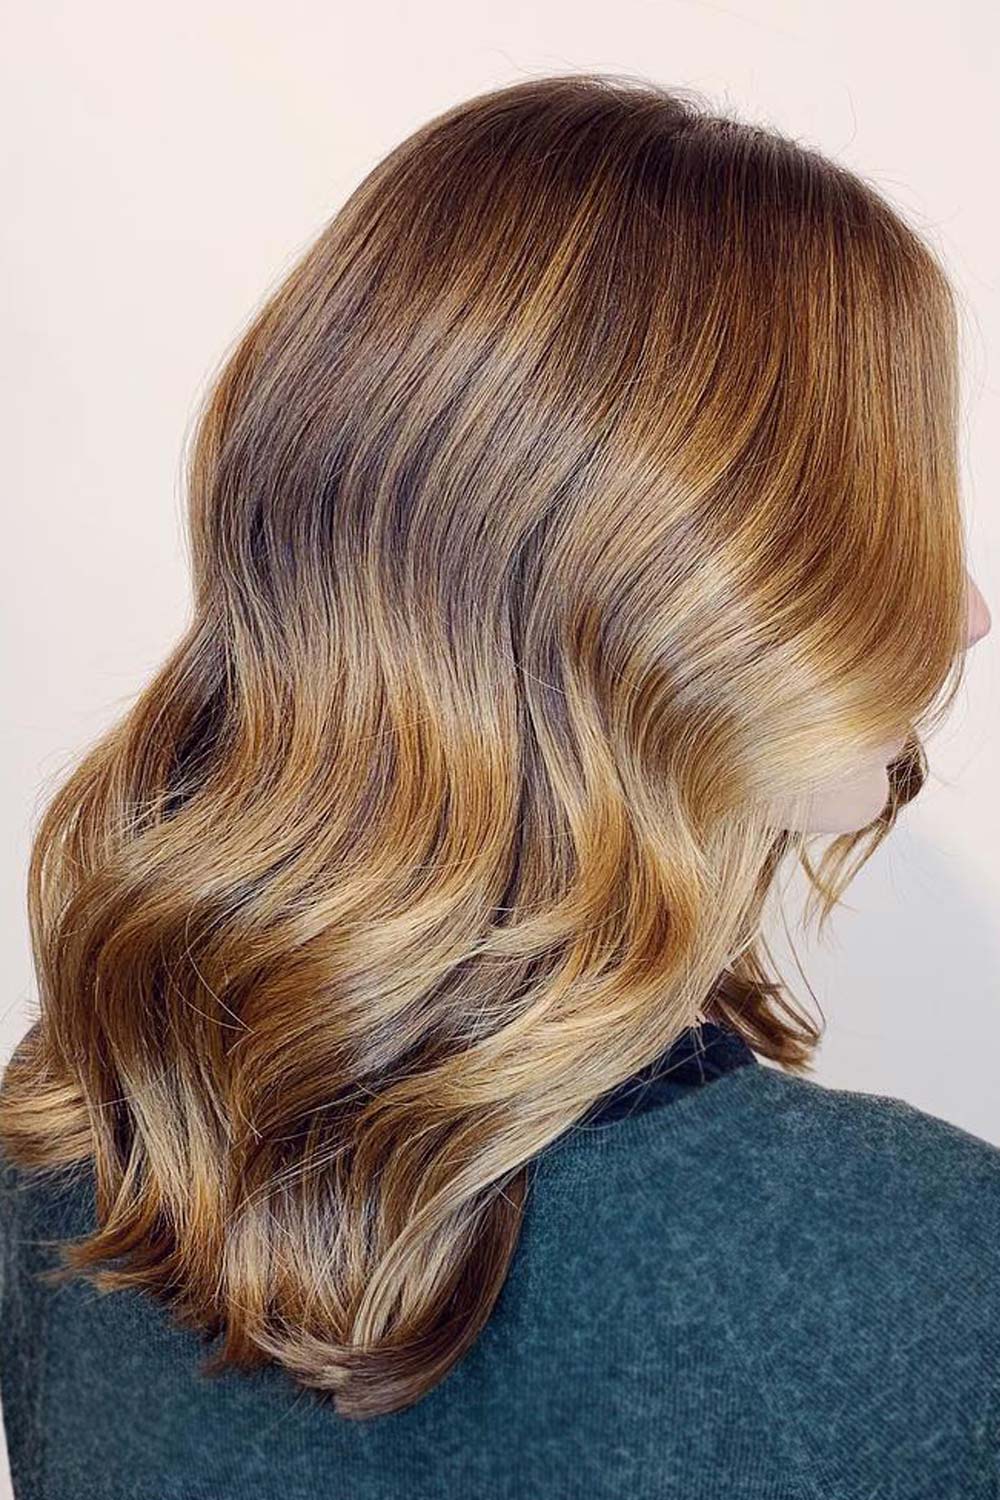 Gorgeous flowing waves will make these caramel balayage tones look like silky ribbons of the real caramel